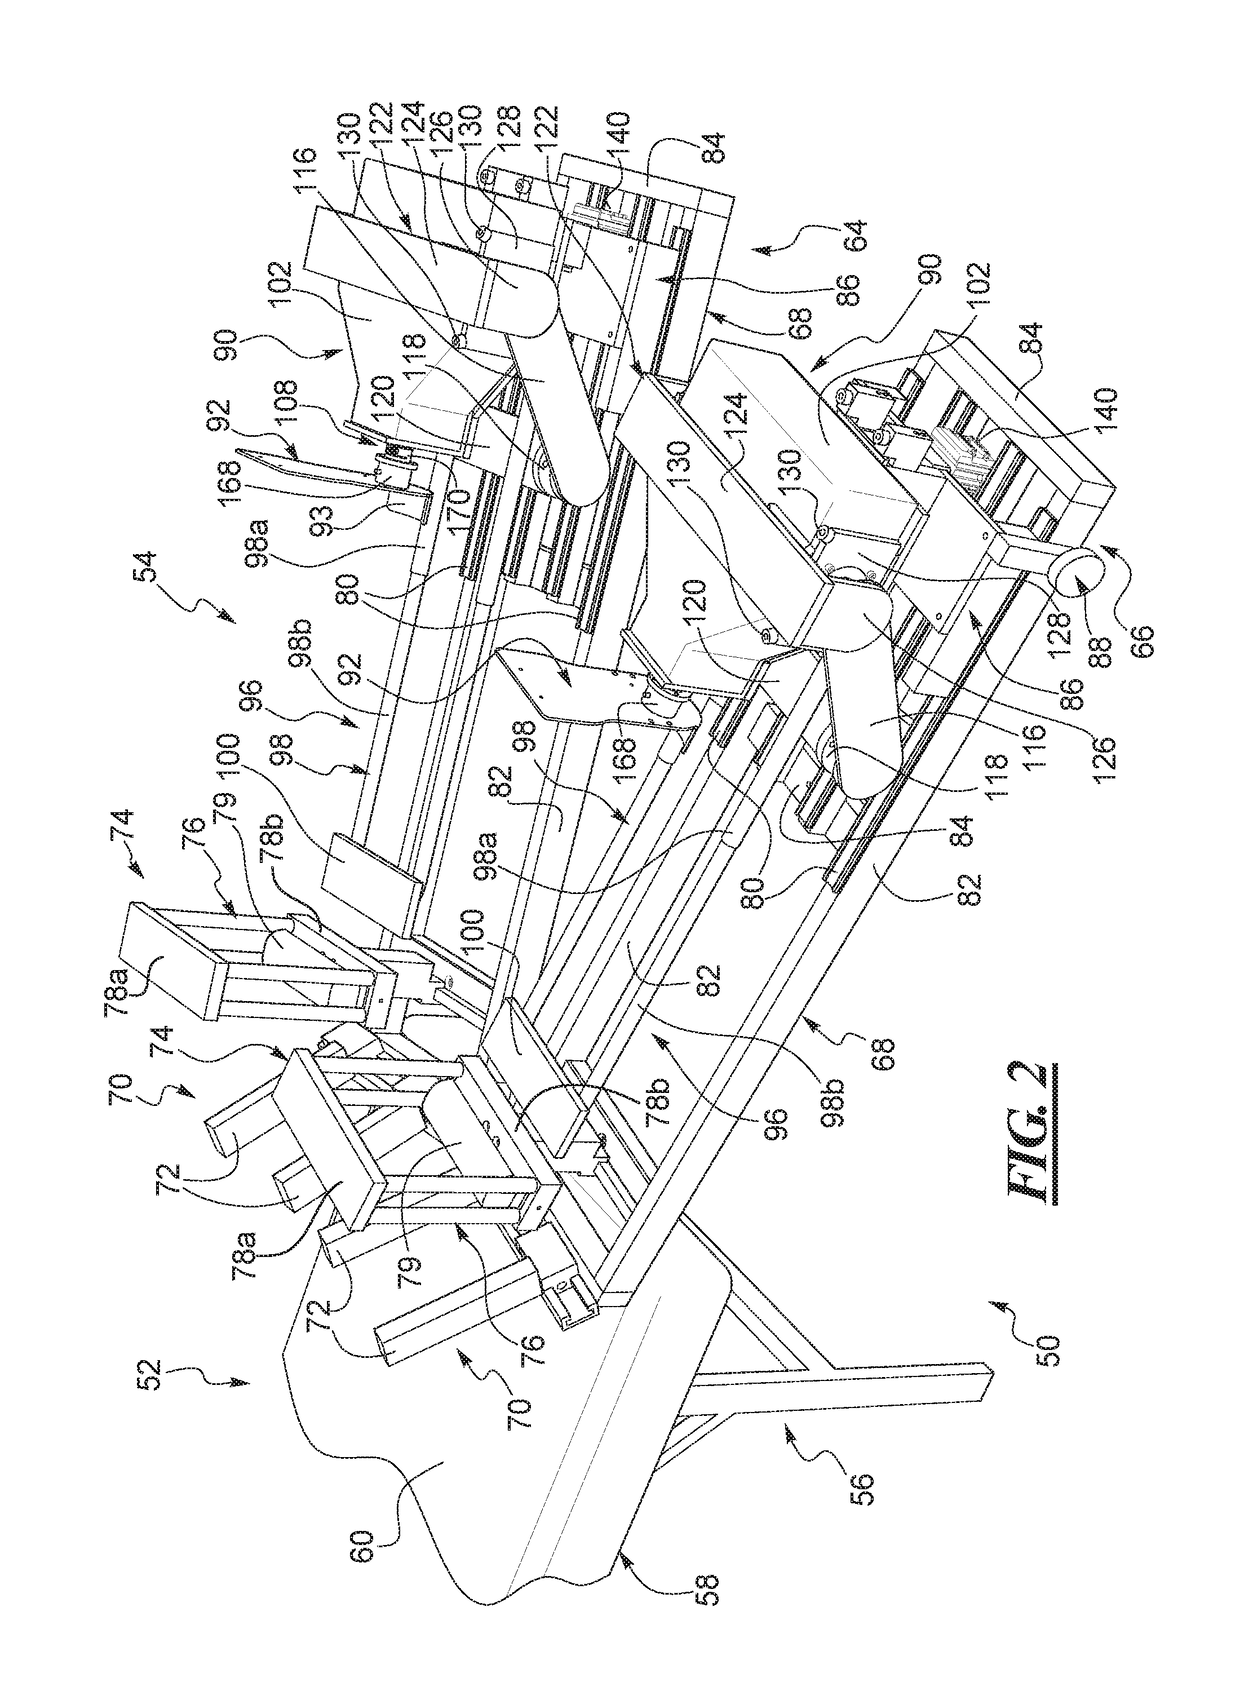 Robotic Joint Testing Apparatus and Coordinate Systems for Joint Evaluation and Testing